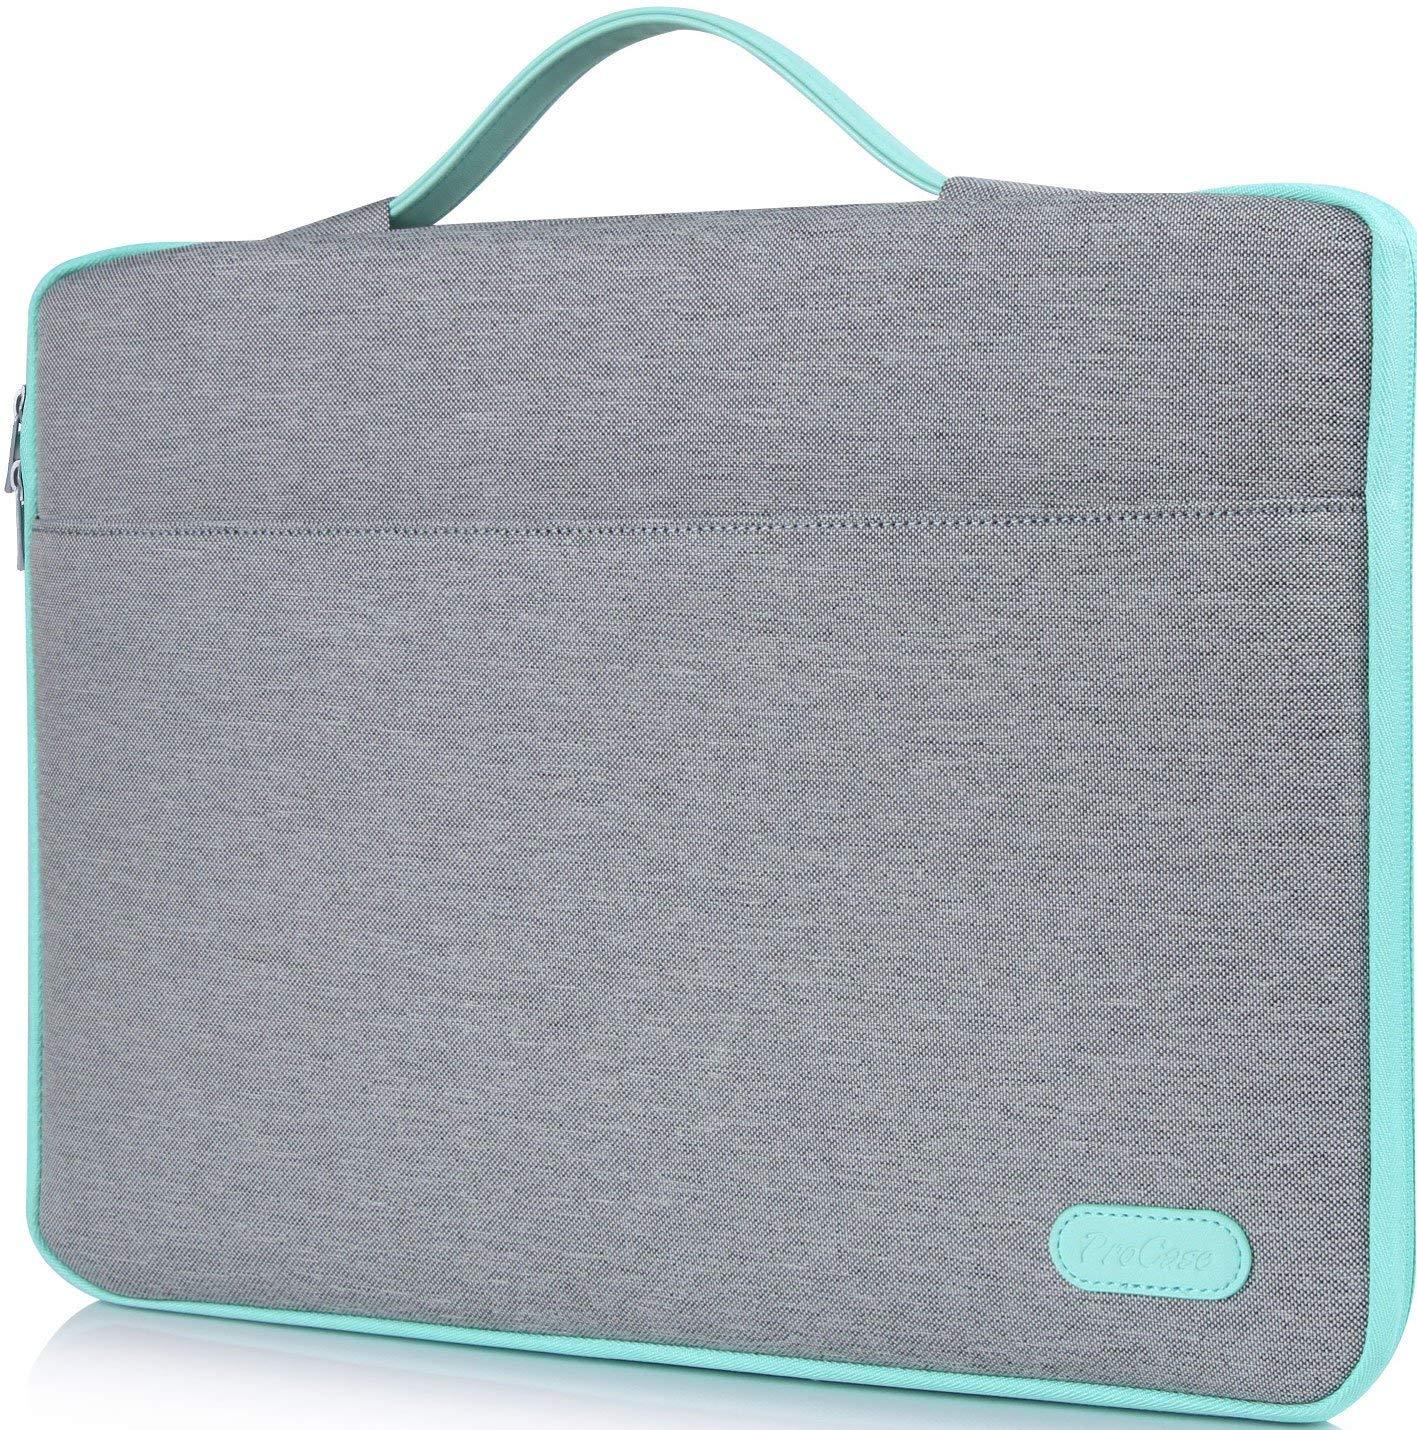 Laptop Sleeve Case Protective Carrying Bag